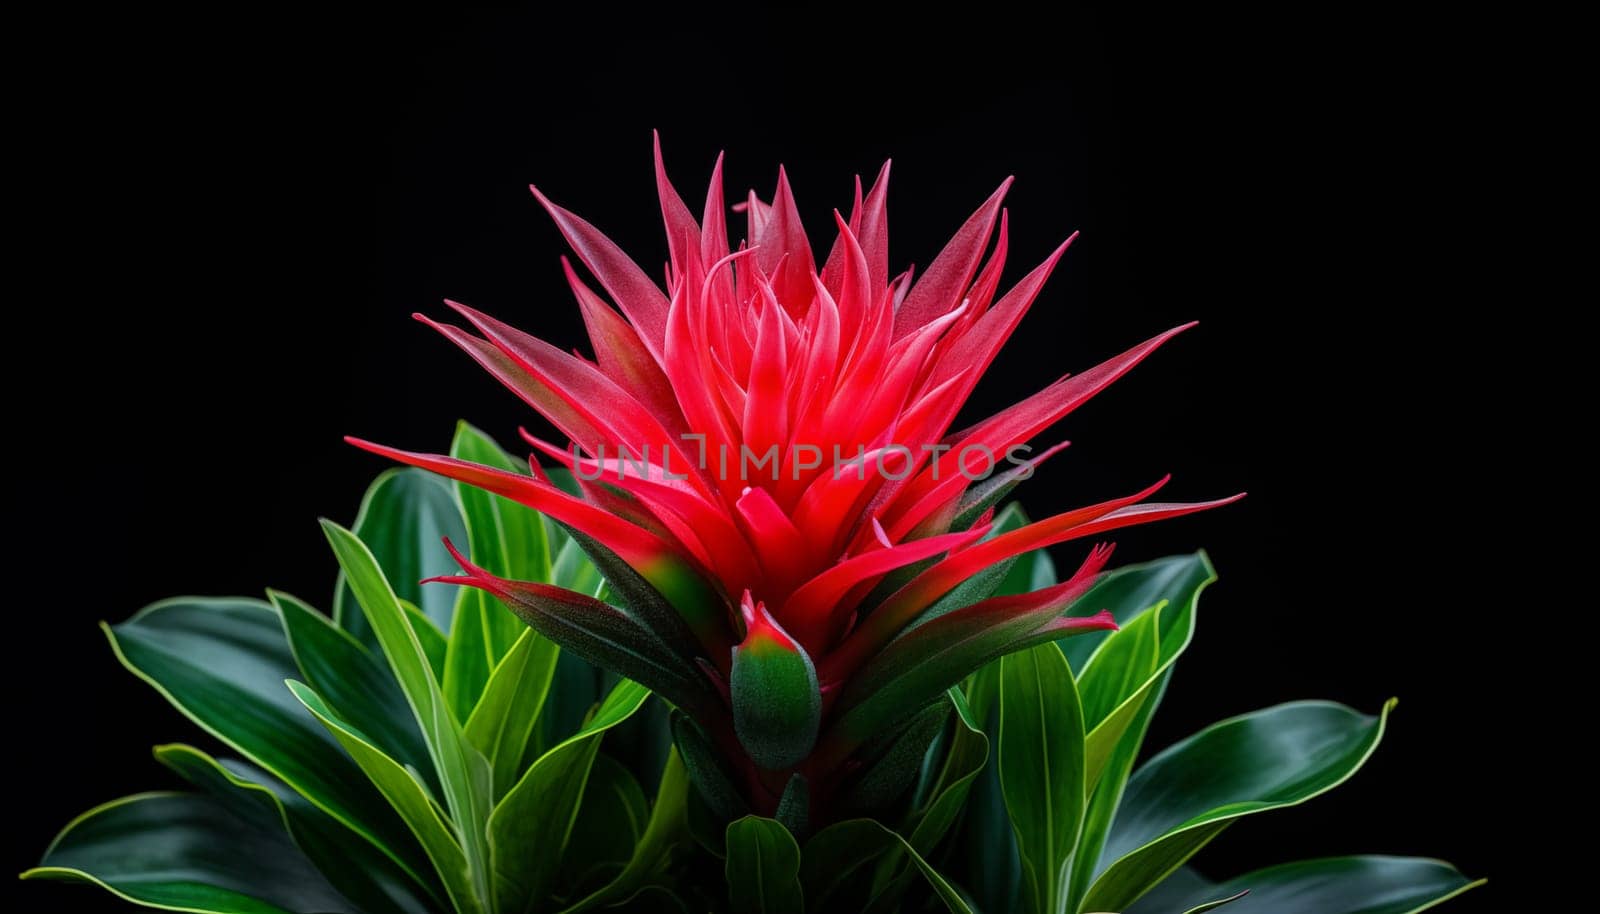 close-up of a Bromeliad plant showcasing by Nadtochiy